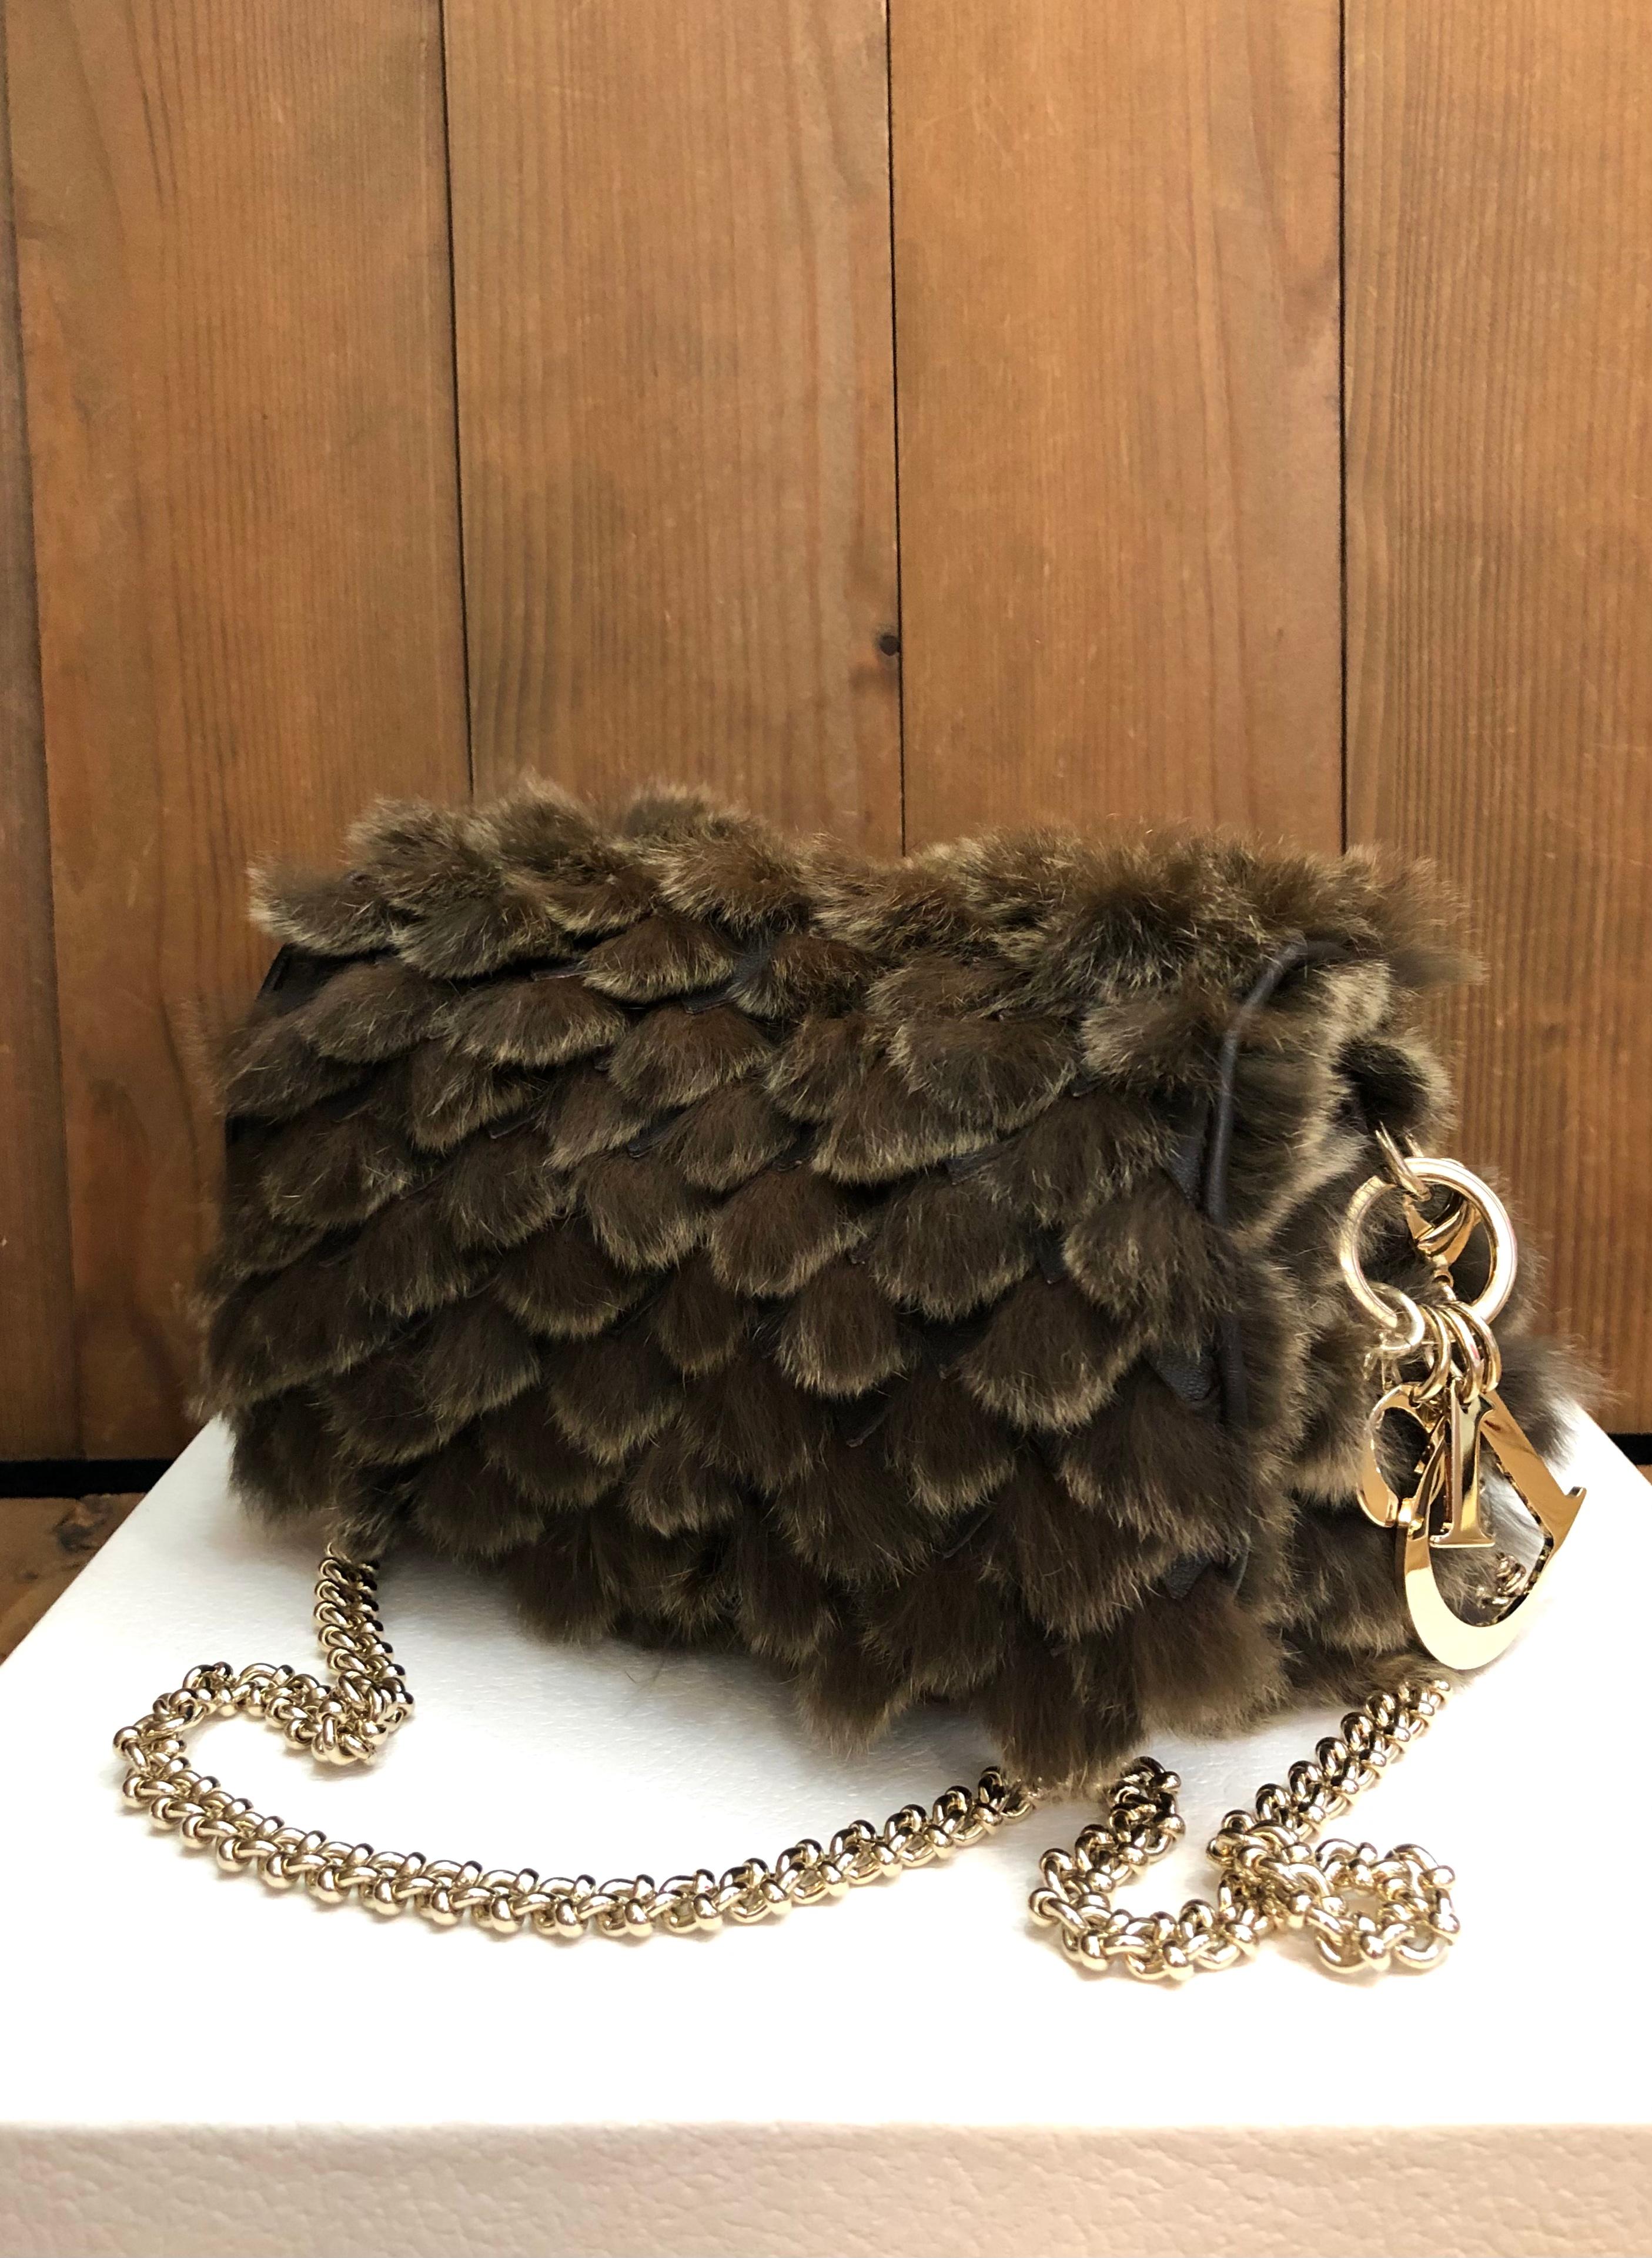 This exquisite CHRISTIAN DIOR chain bag is crafted of brown/gray rabbit fur and lambskin leather featuring gold toned hardware and a gold toned DIOR charm. Front flap magnetic snap closure opens to an interior lined with rabbit fur of the same